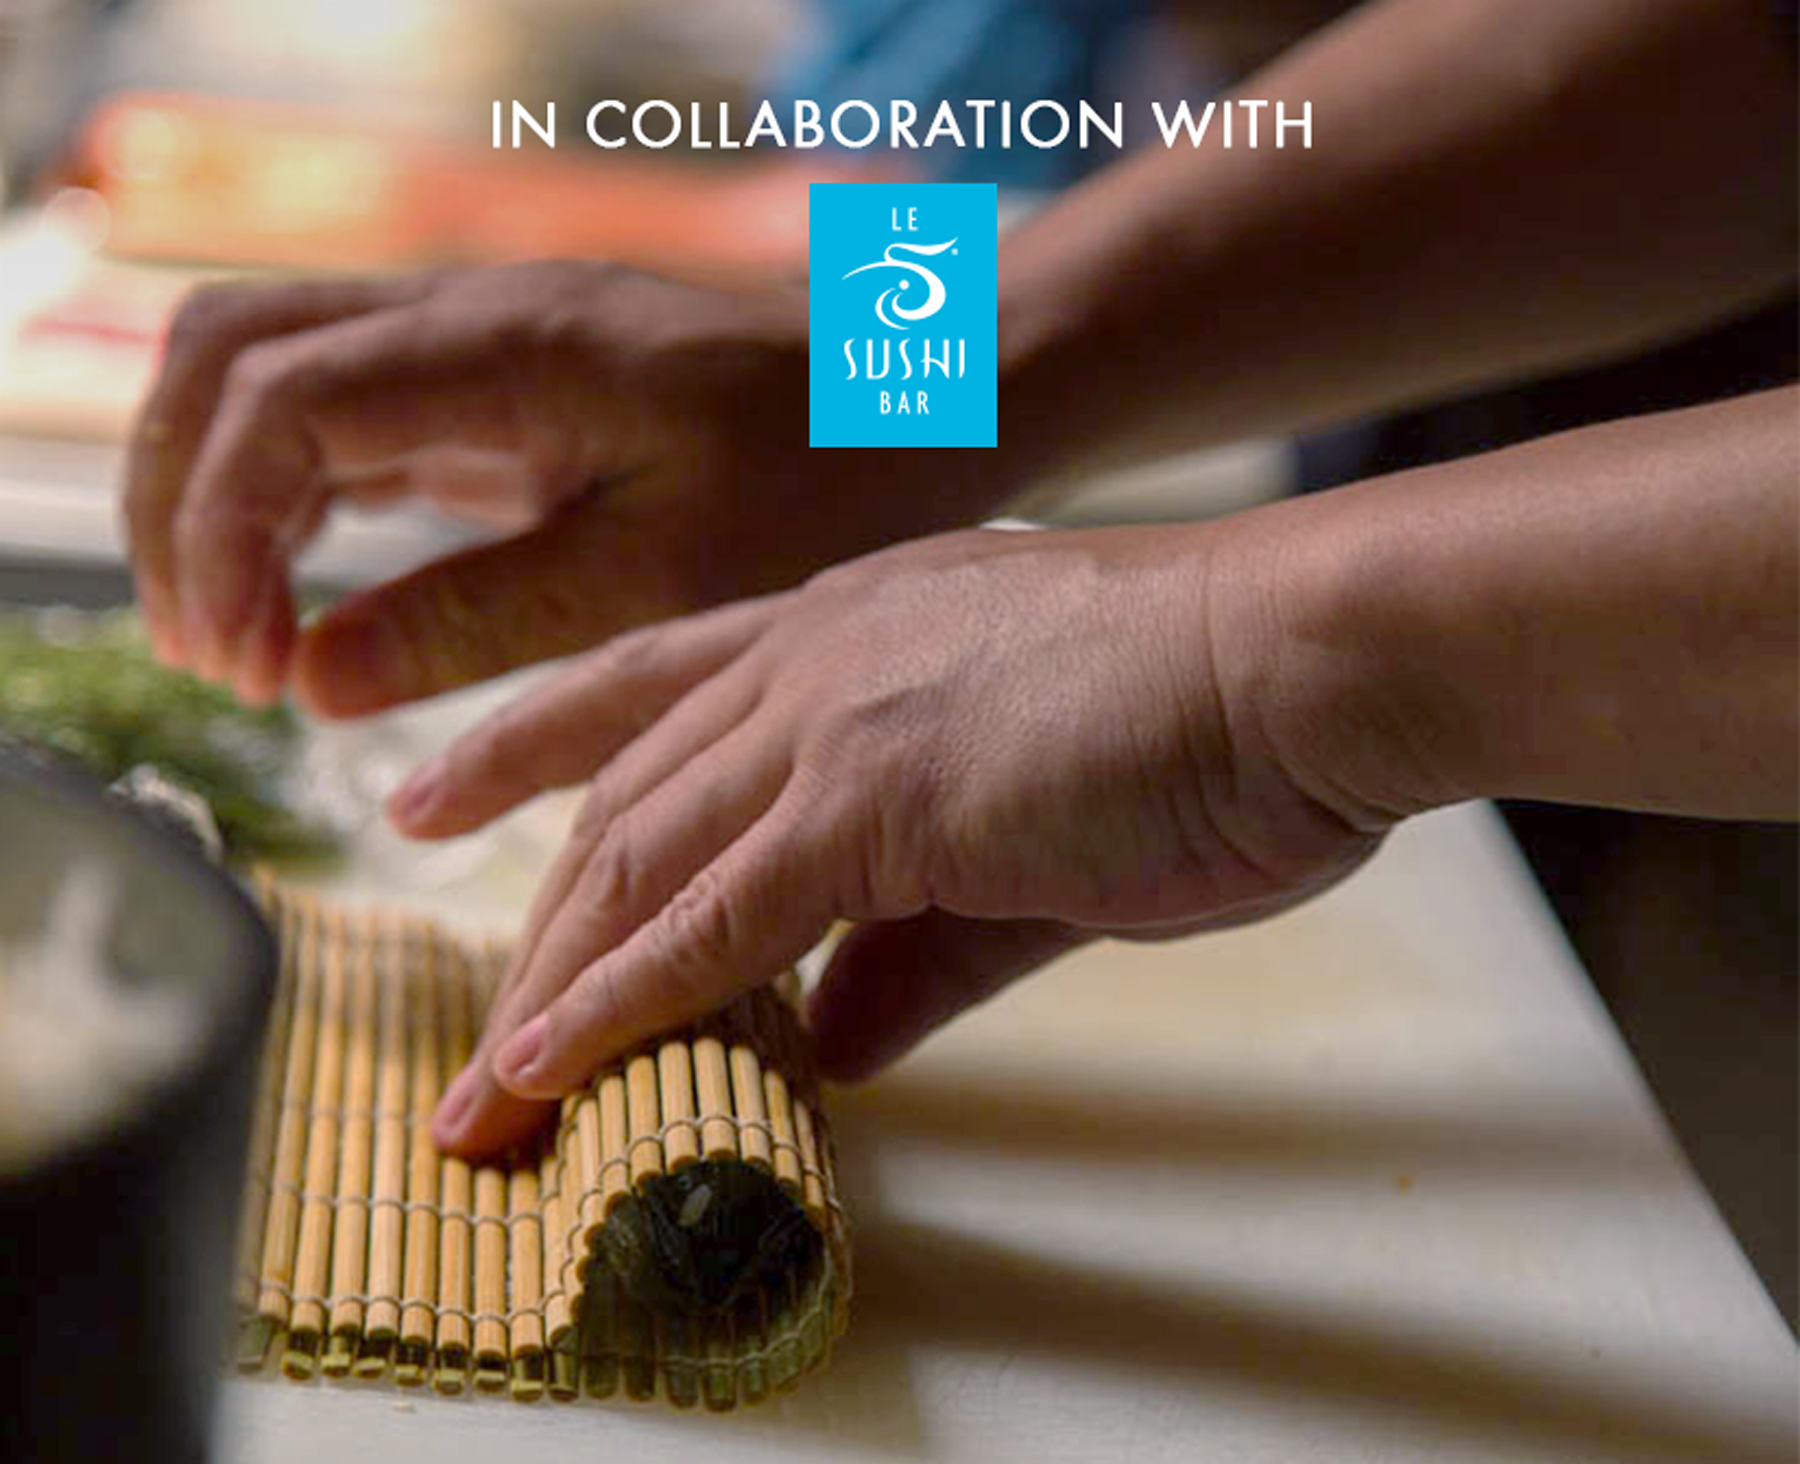 Let’s roll sushi in collaboration with Le Sushi Bar